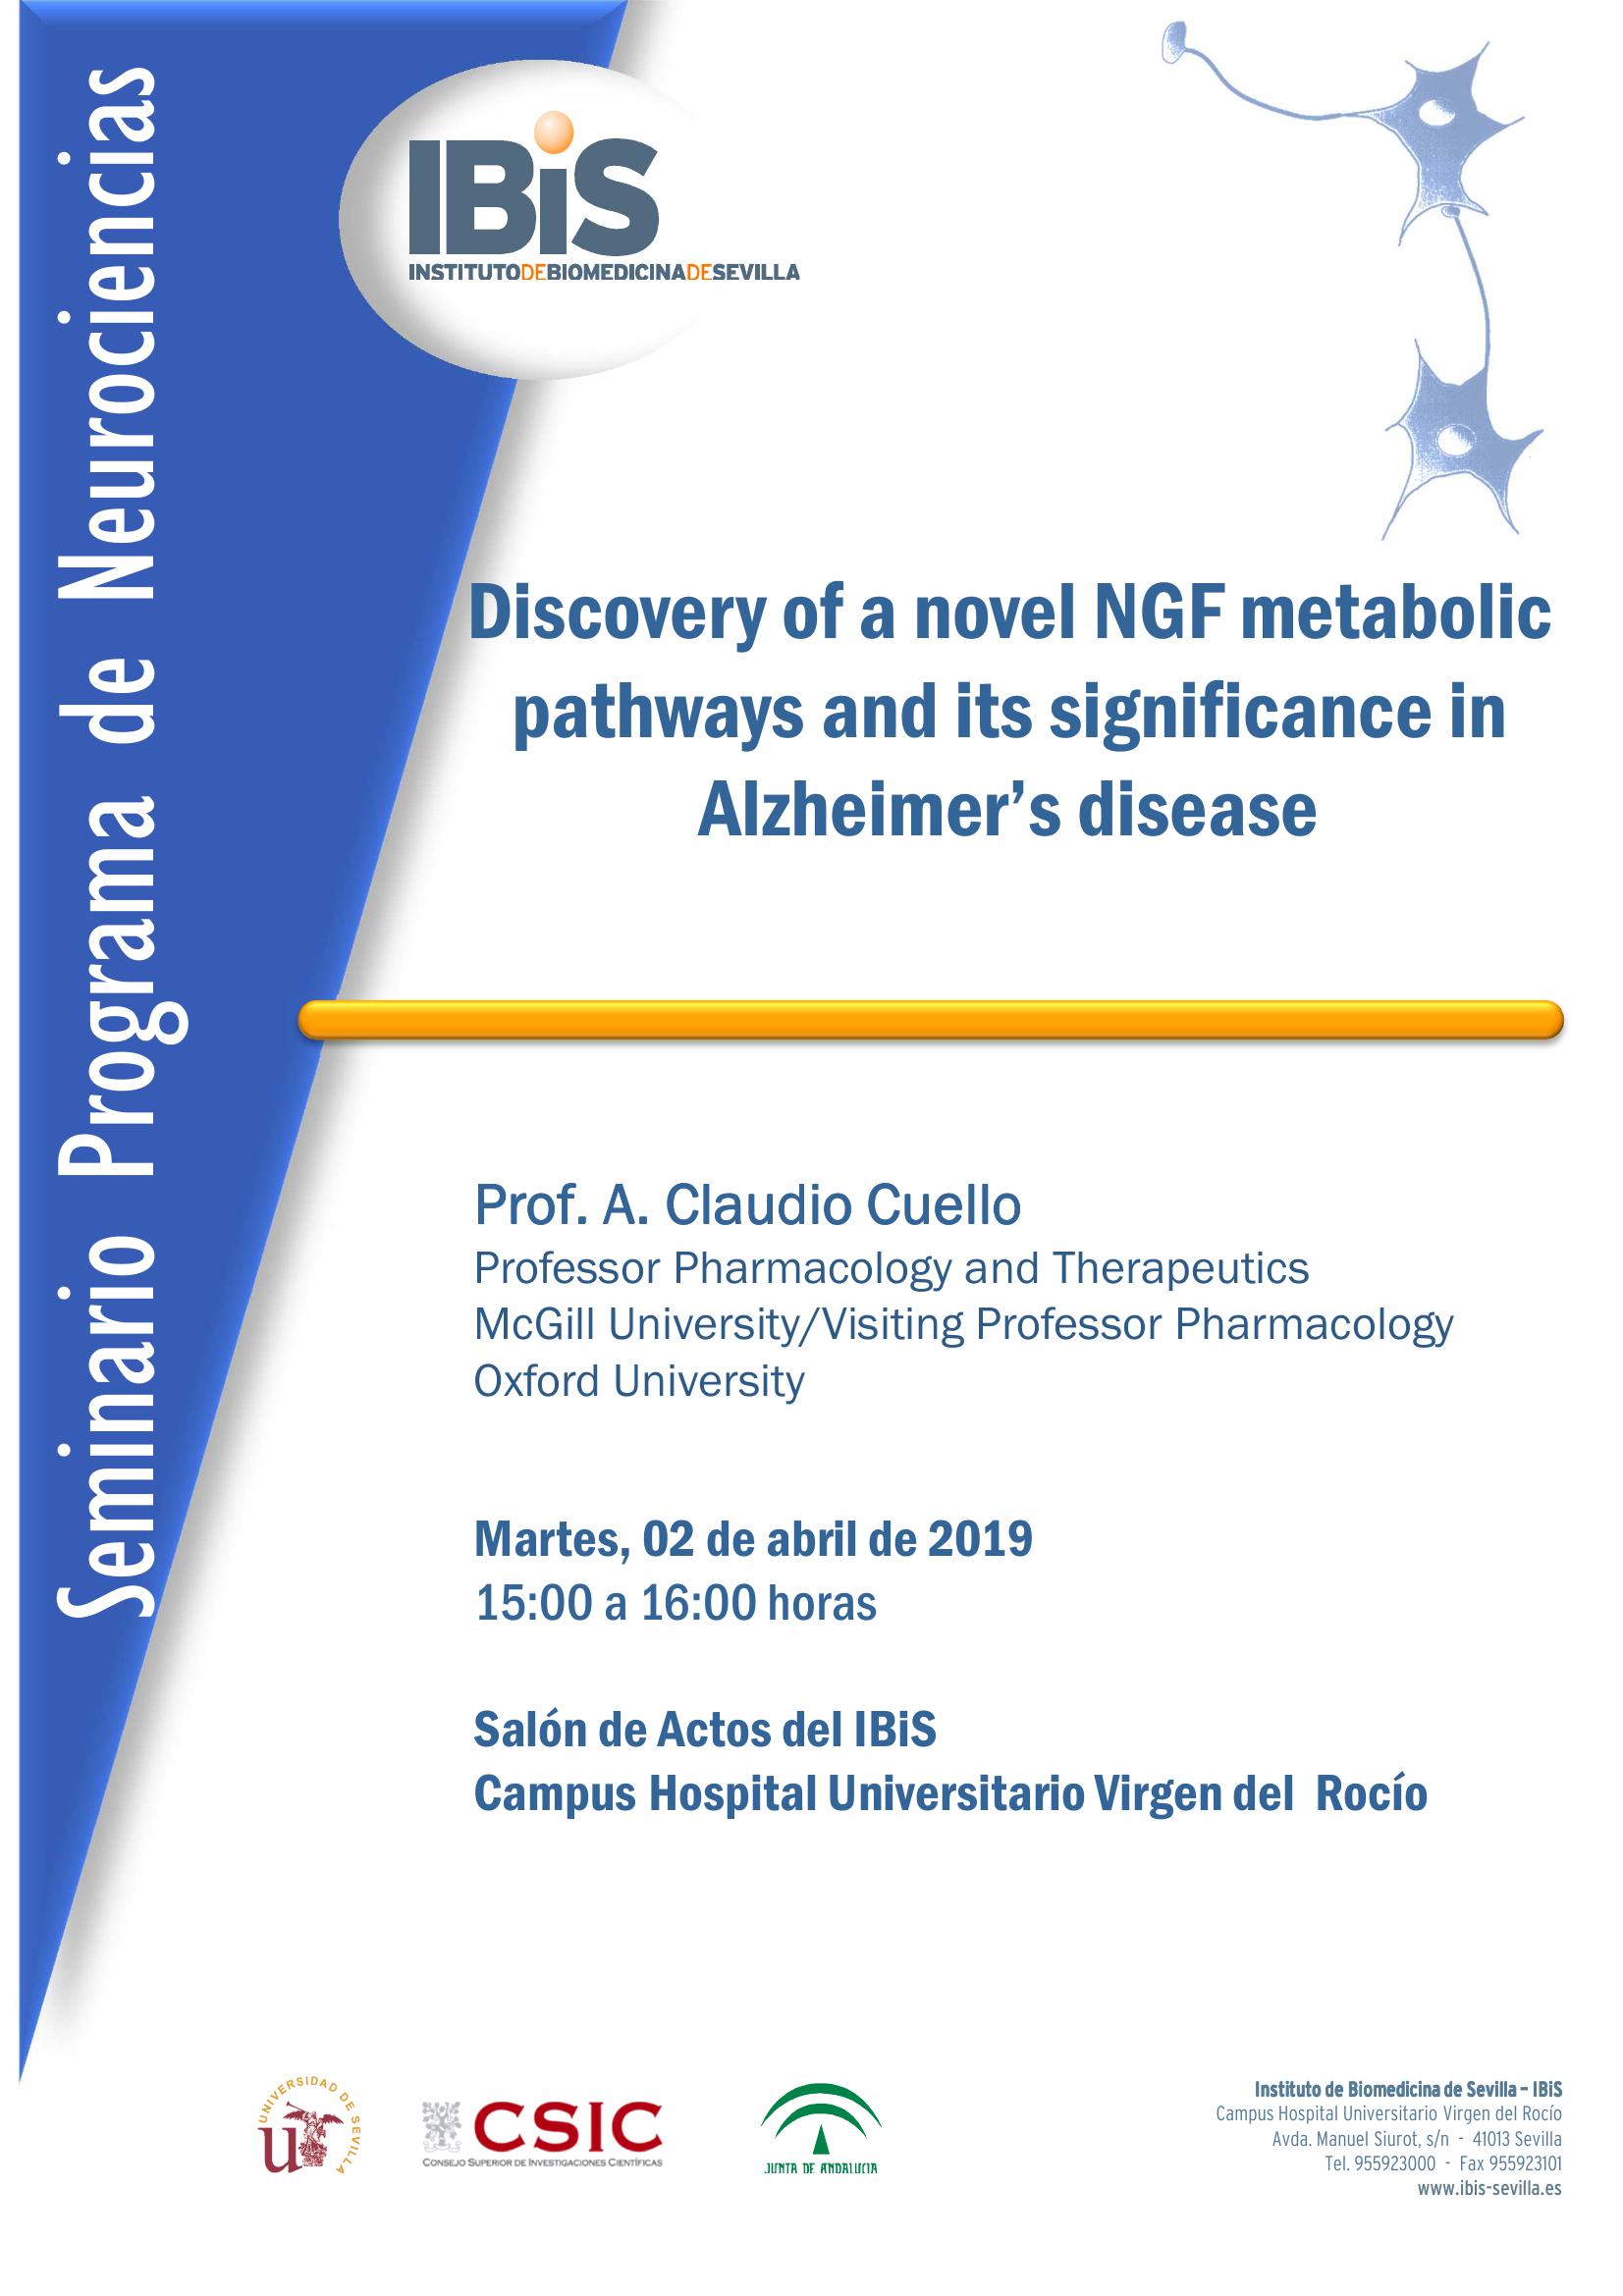 Poster: Discovery of a novel NGF metabolic pathways and its significance in Alzheimer’s disease